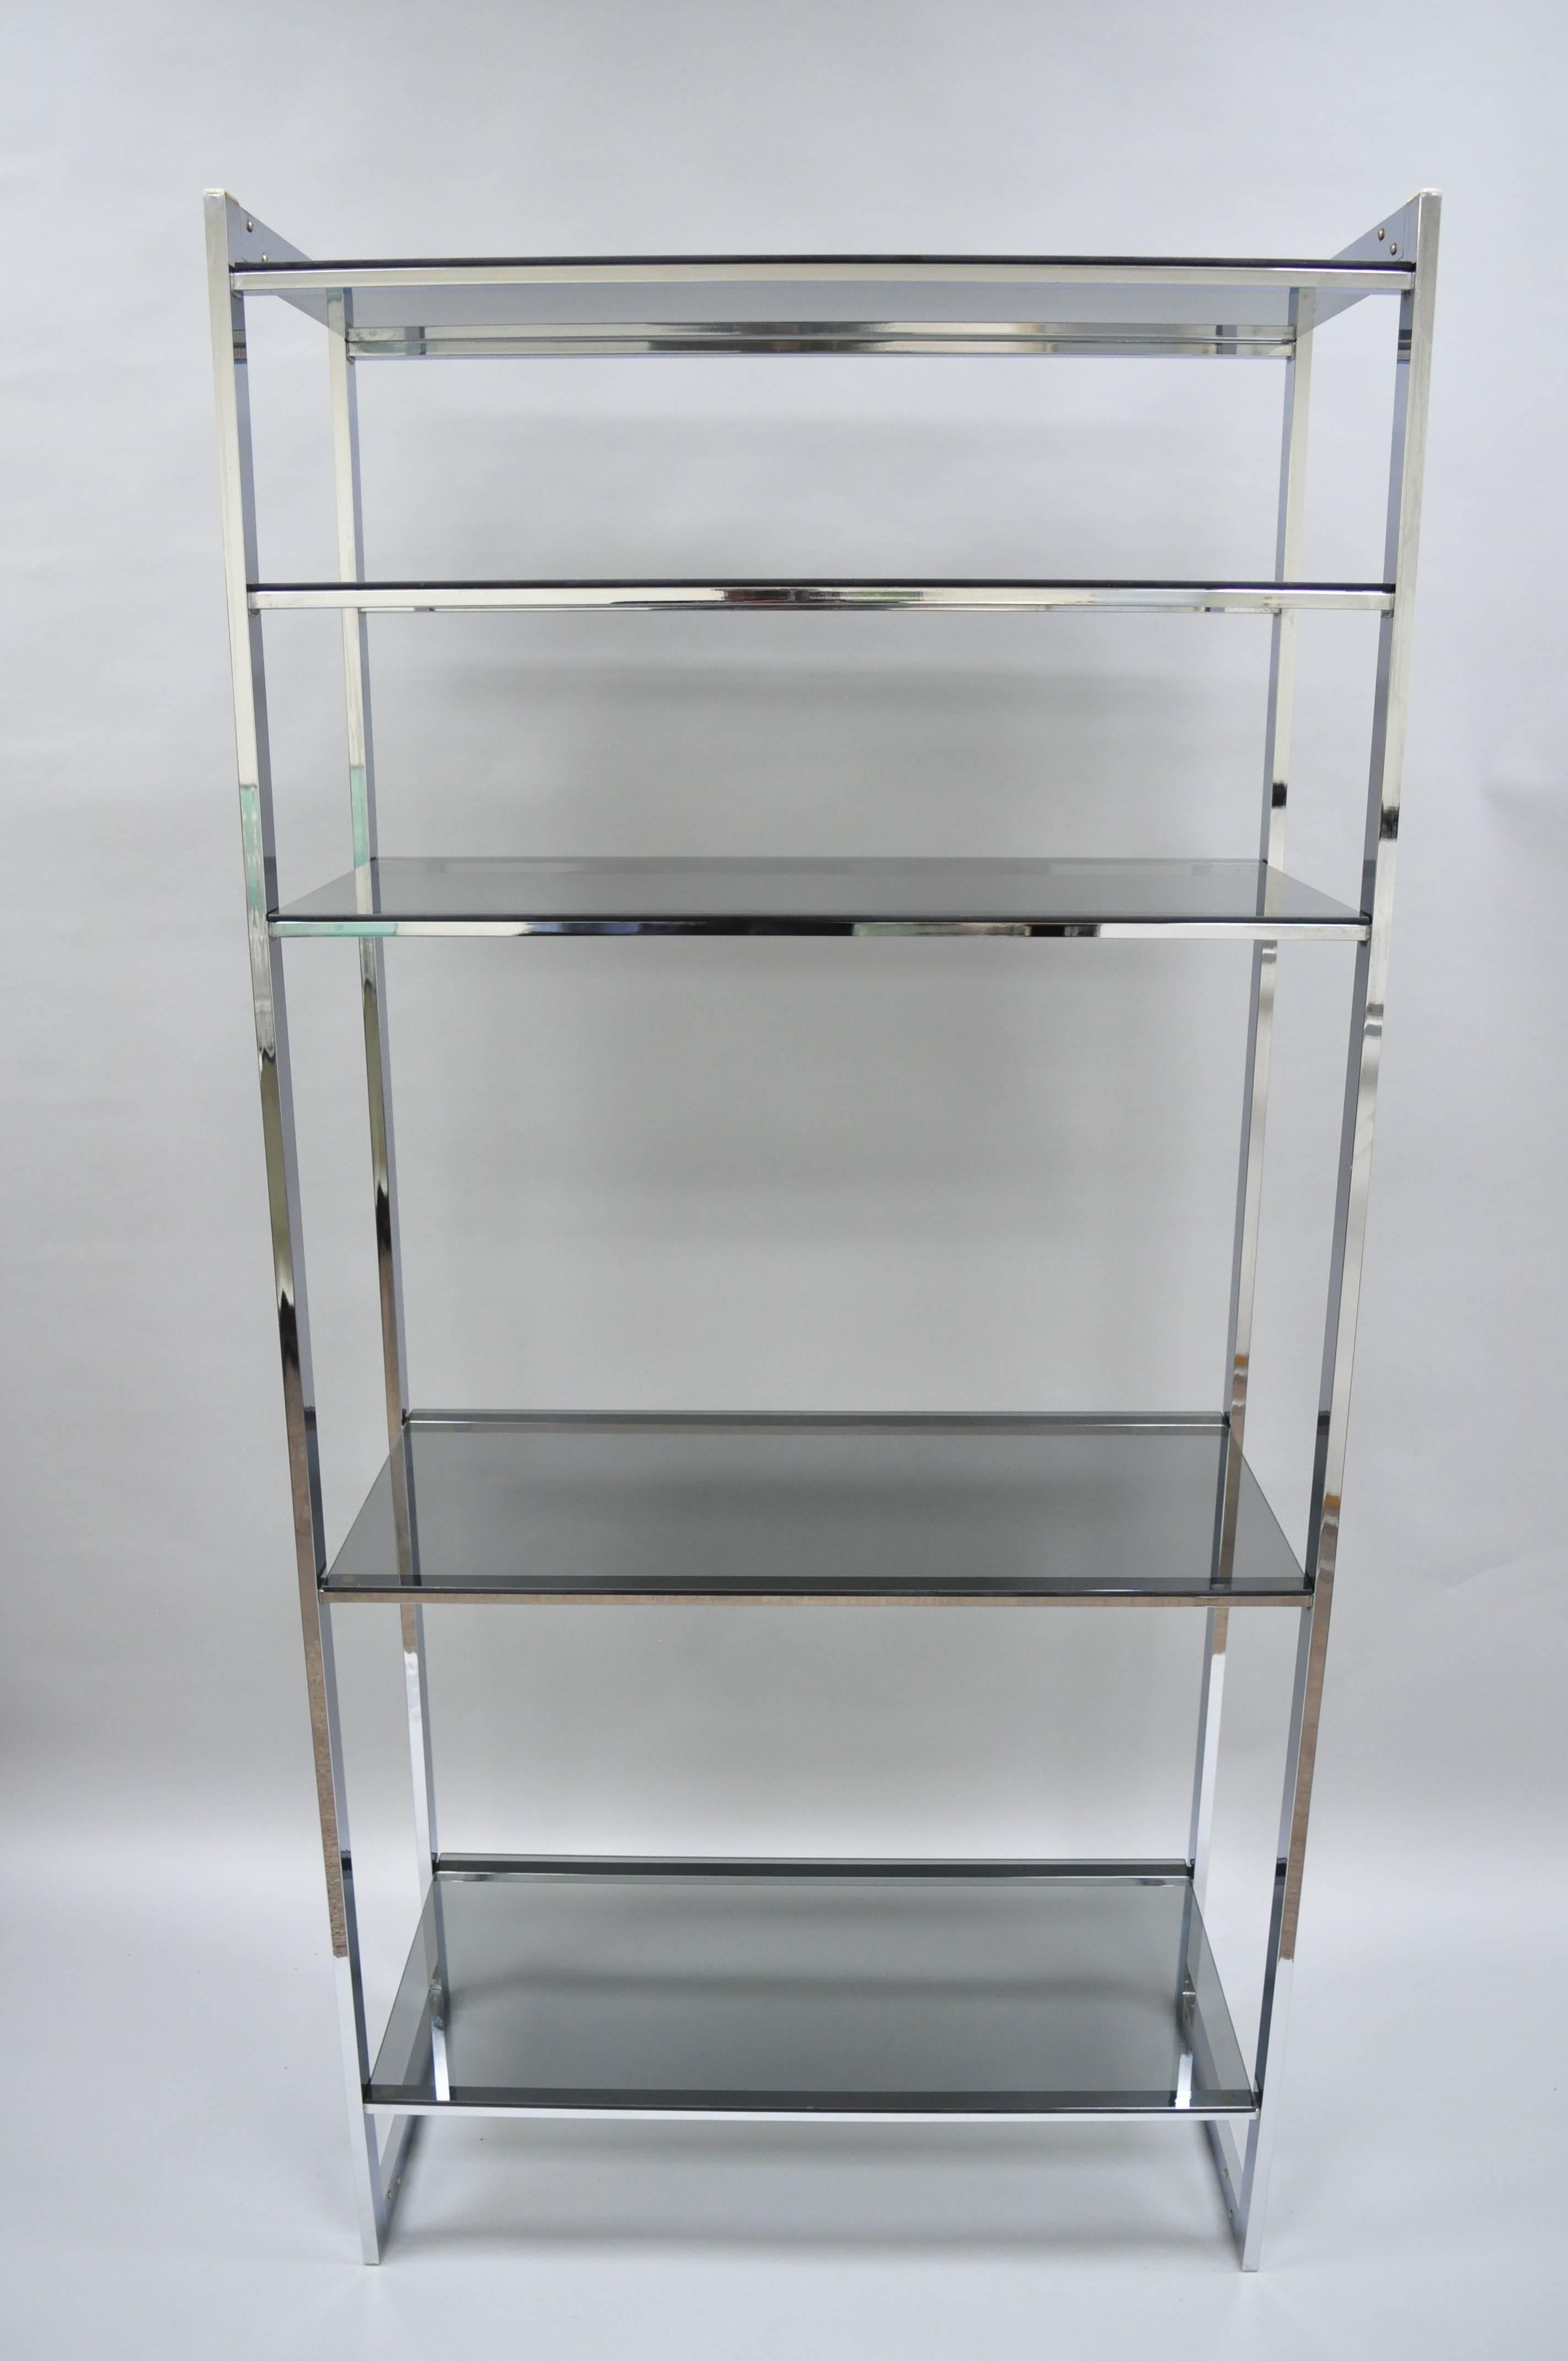 Vintage Mid-Century Modern chrome and smoked glass étagère bookcase shelf. Item features sleek chrome metal frame, five smoked glass shelves, clean modernist lines, circa 1970s. Measurements: Overall: 74